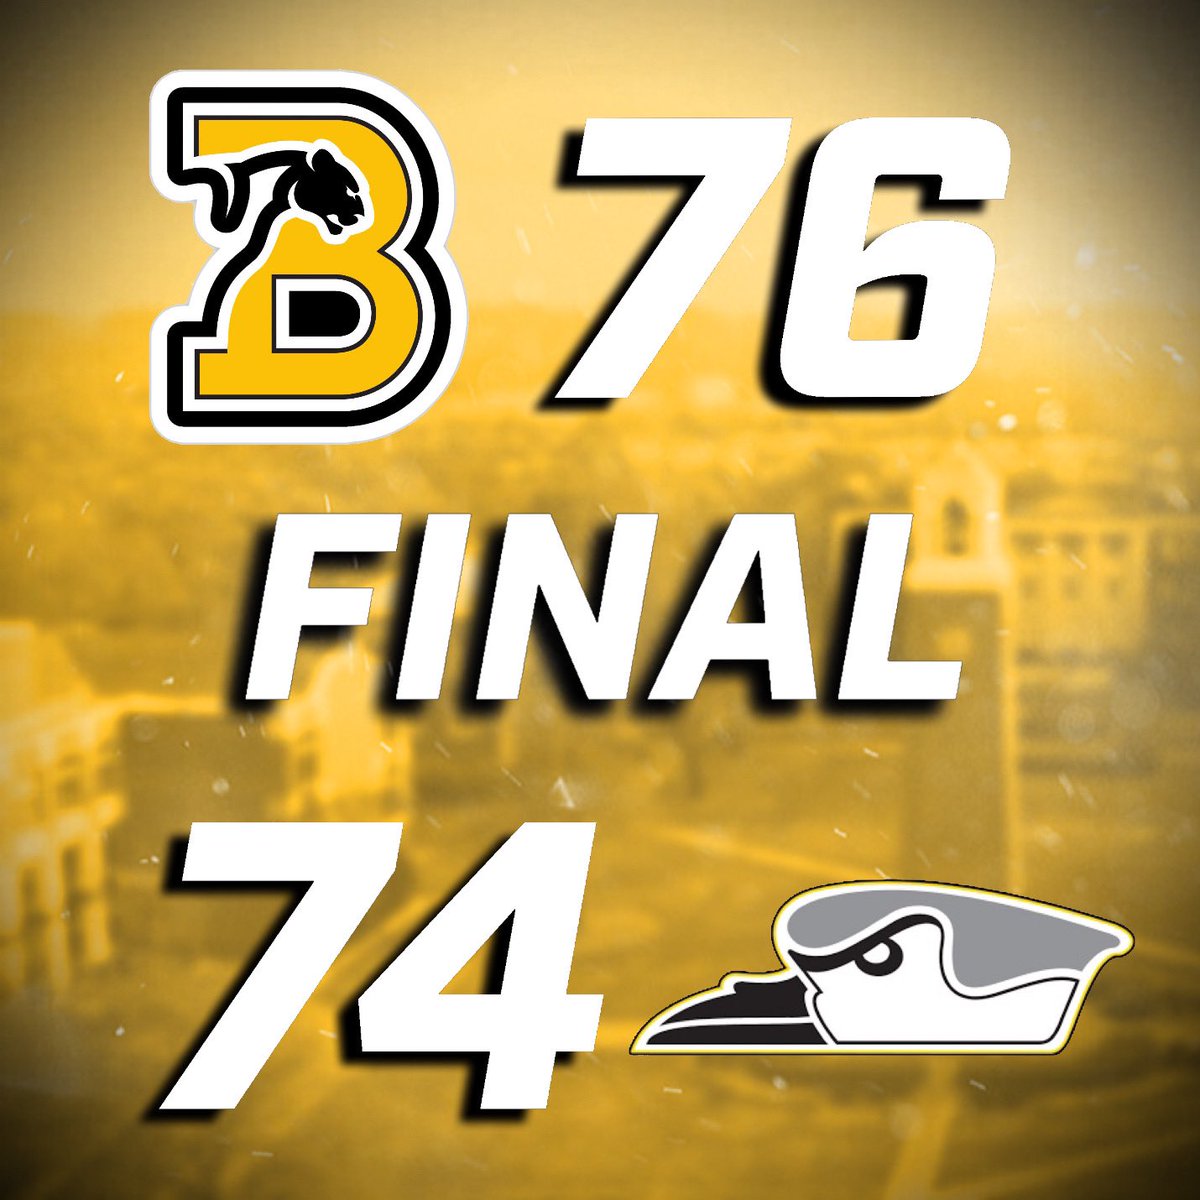 Big win in Atlanta! #yeahpanthers